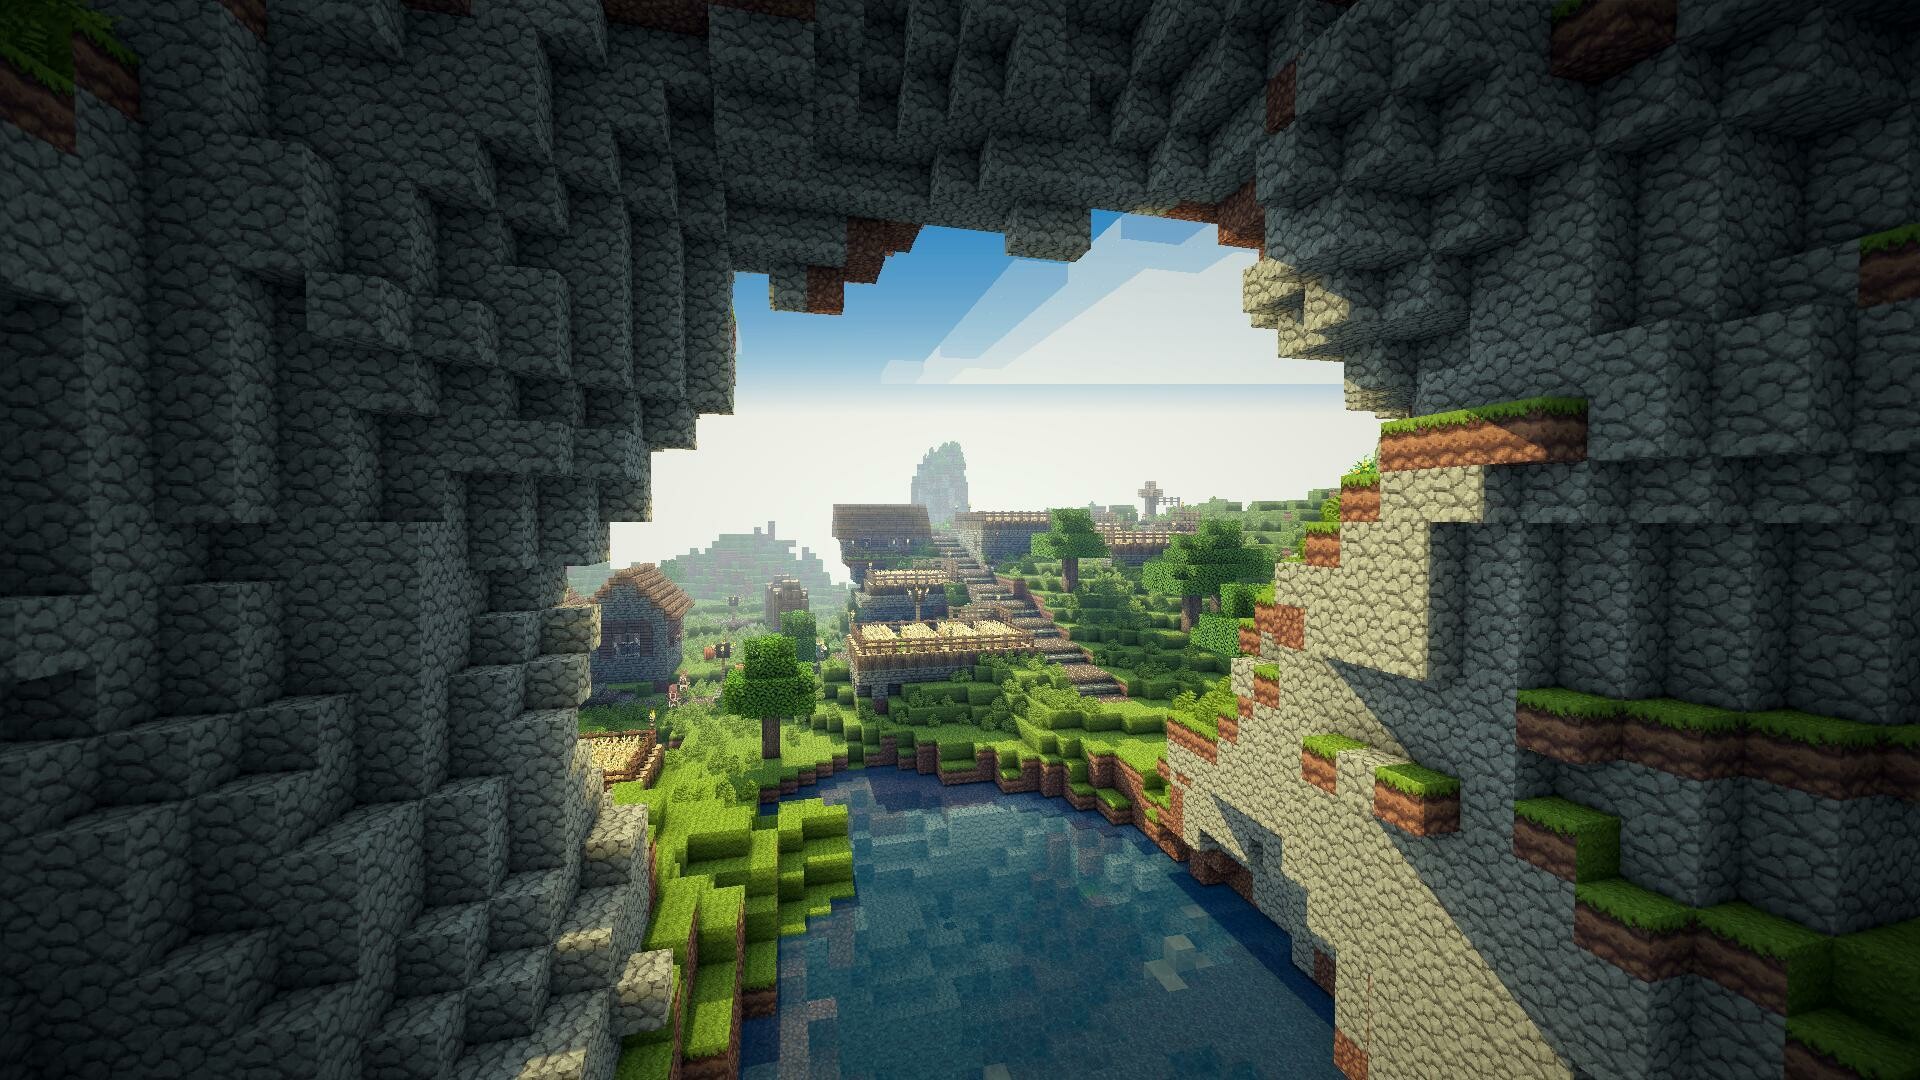 HD Wallpapers of Minecraft (82+ pictures)